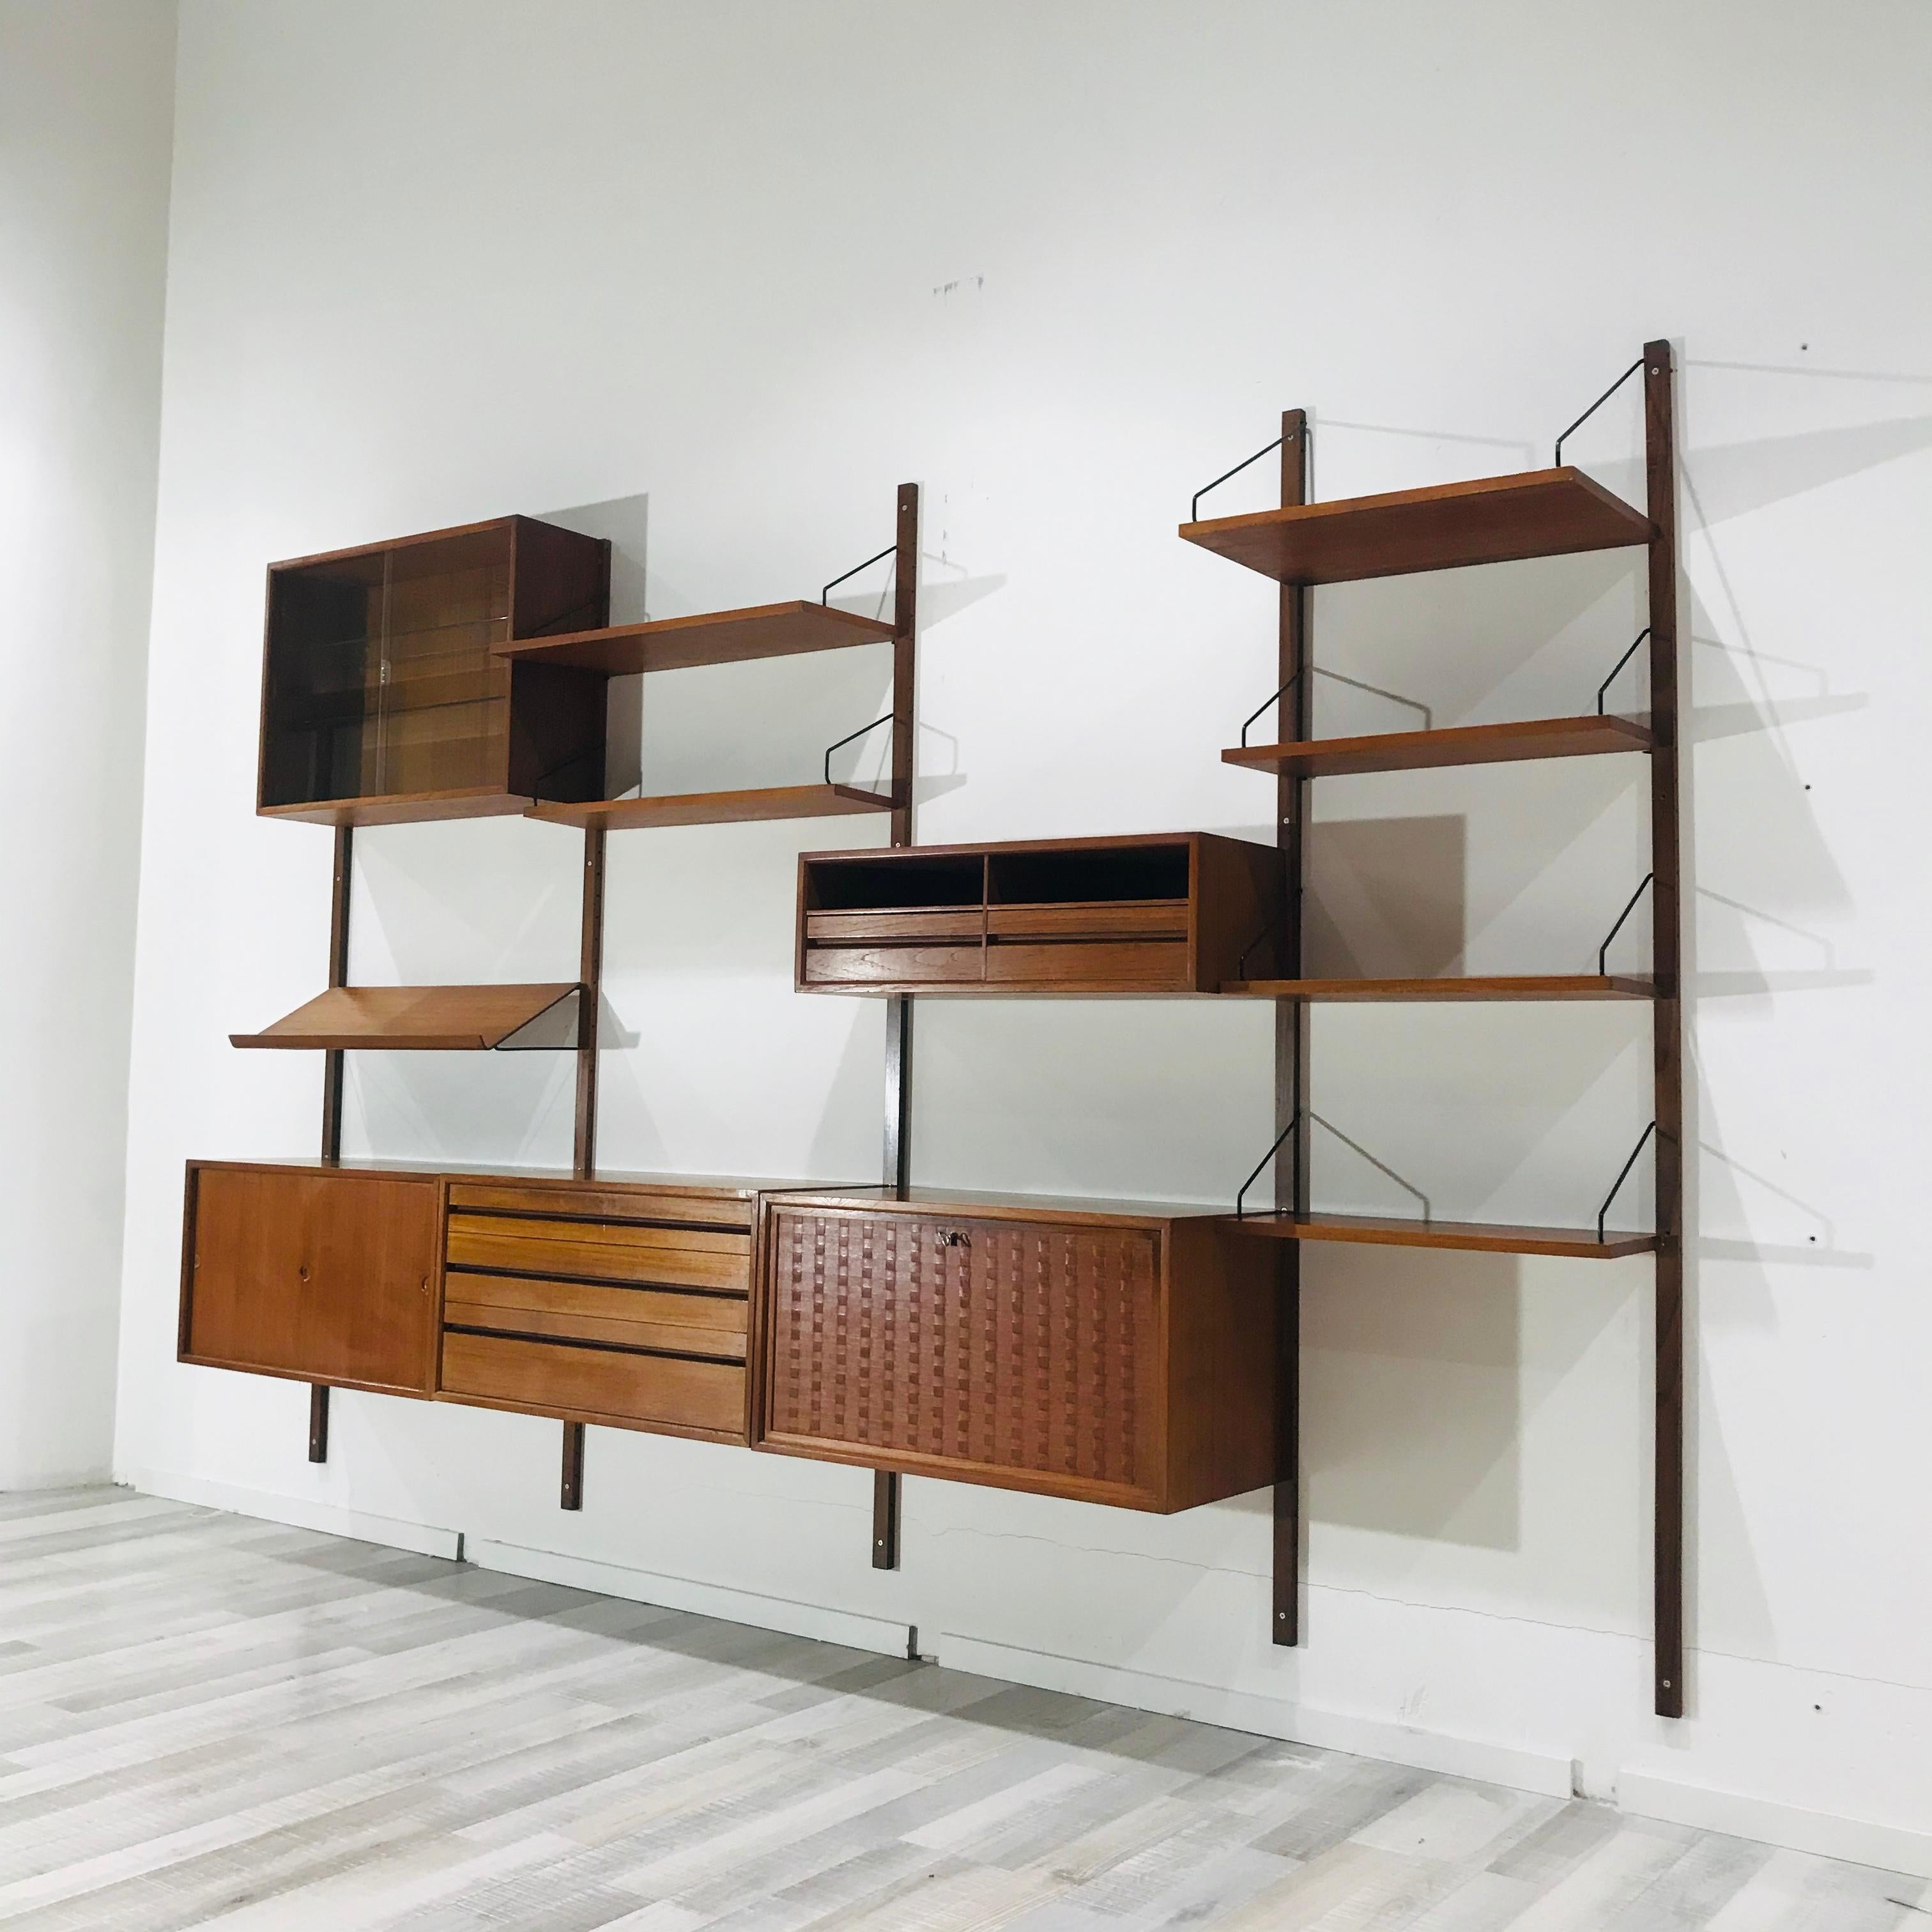 This large teak wall system was designed in 1948 by Poul Cadovius in Denmark. The 